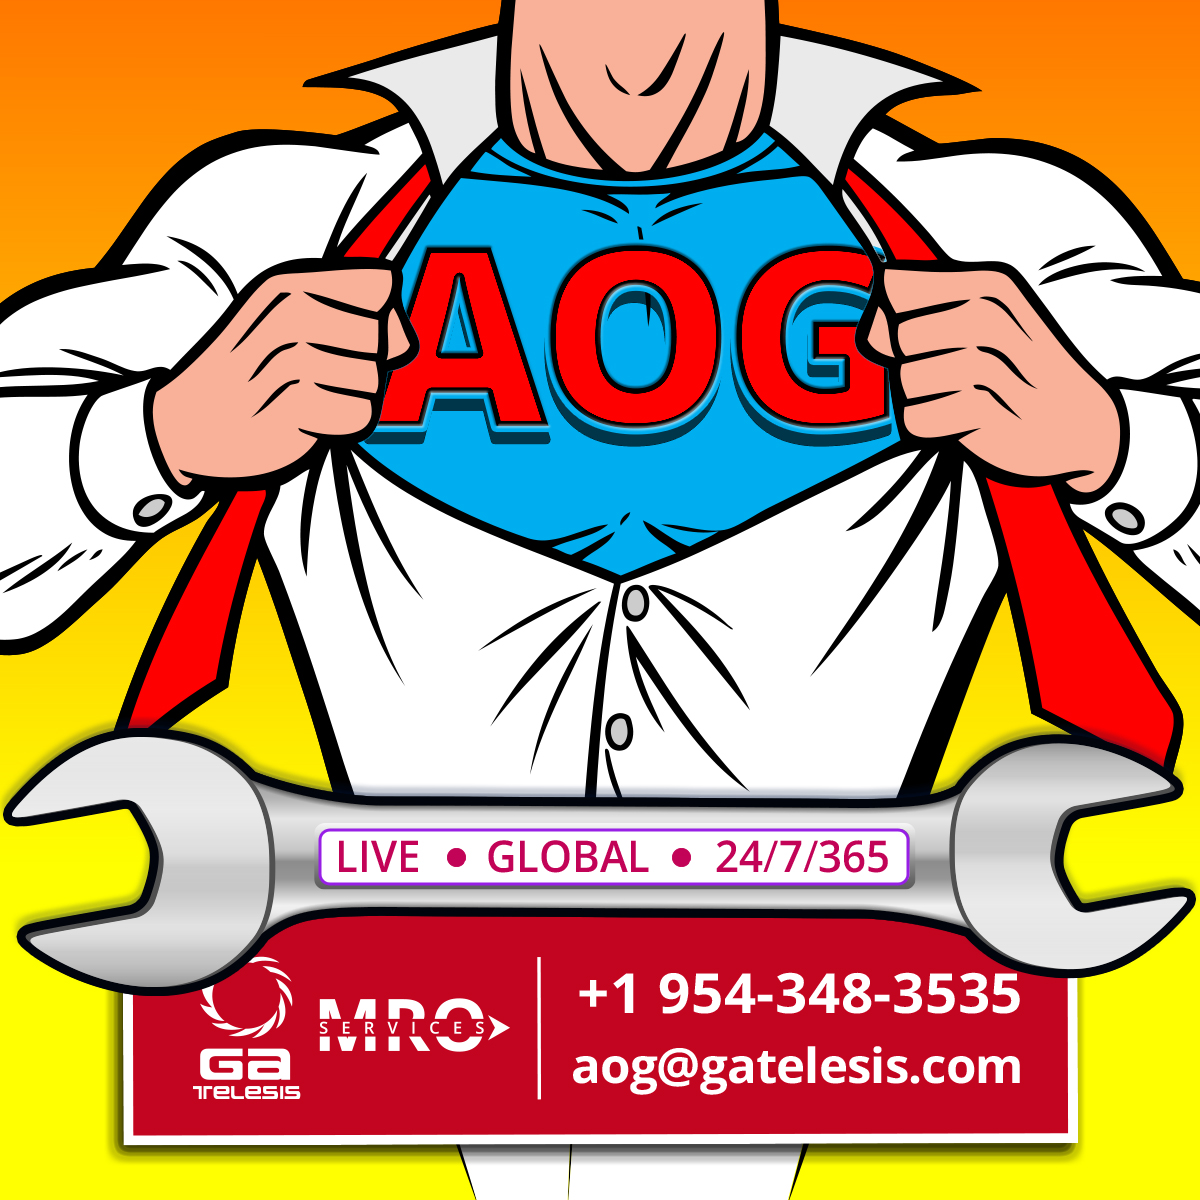 Our MRO Services AOG Team is just a call away - CALL #954-348-3535 or EMAIL aog@gatelesis.com!
Visit us: ow.ly/R1SS50Os7s0

#GATelesis #Aviation #Engineering #Airlines #Aircraft #AviationIndustry #AircraftMaintenance #Airline #Airplane #AviationMaintenance